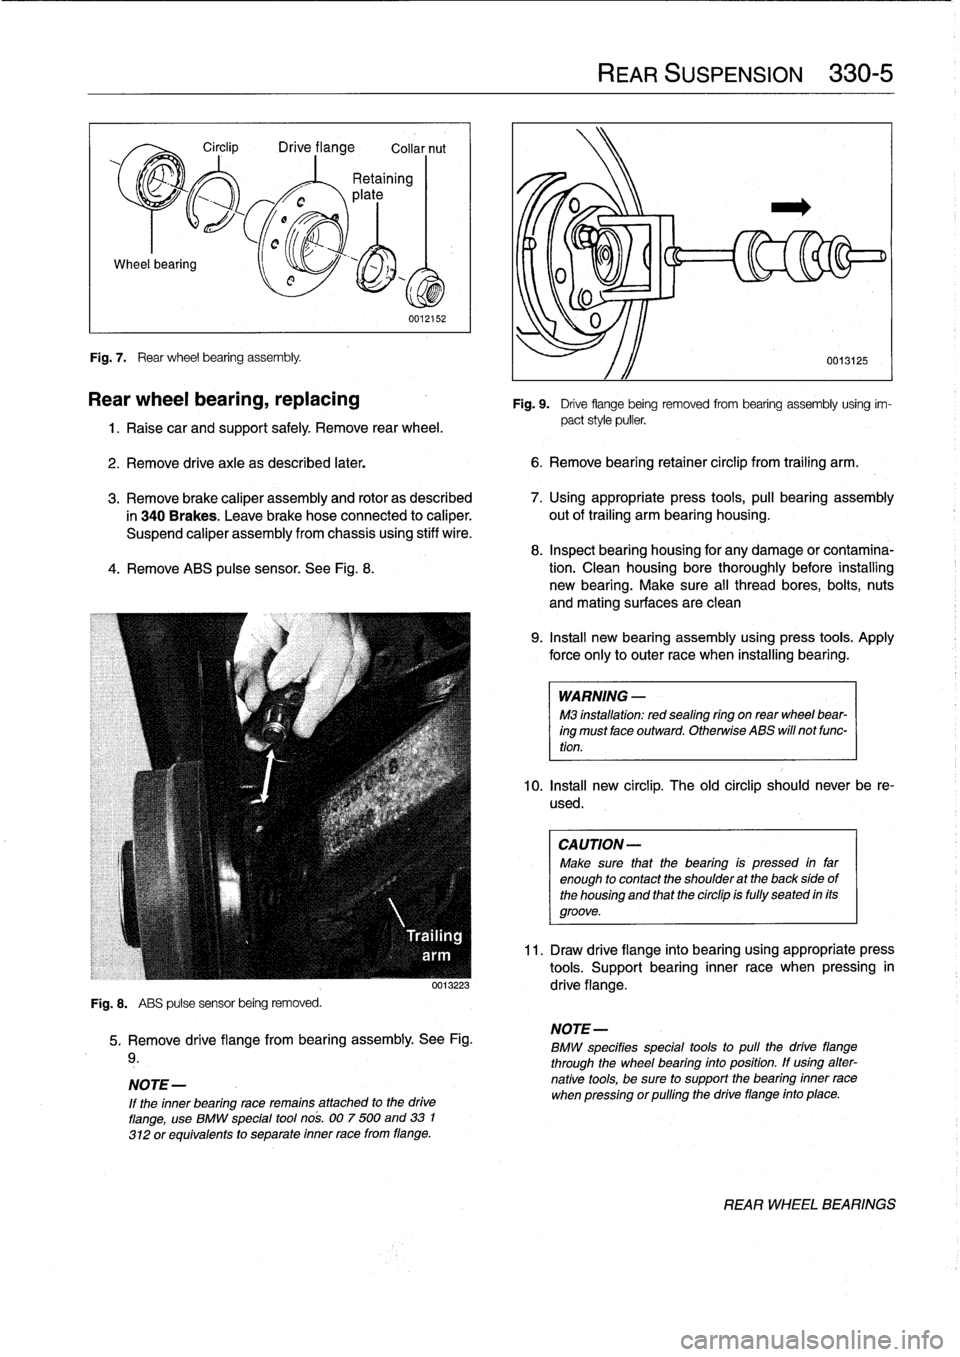 BMW 323i 1997 E36 Owners Guide Wheel
bearing

Fig
.
7
.

	

Rear
wheel
bearing
assembly
.

Circlip

	

Drive
flange

	

Collar
nut

0012152

Rear
wheel
bearing,
replacing

1
.
Raise
car
and
support
safely
.
Remove
rear
wheel
.

2
.